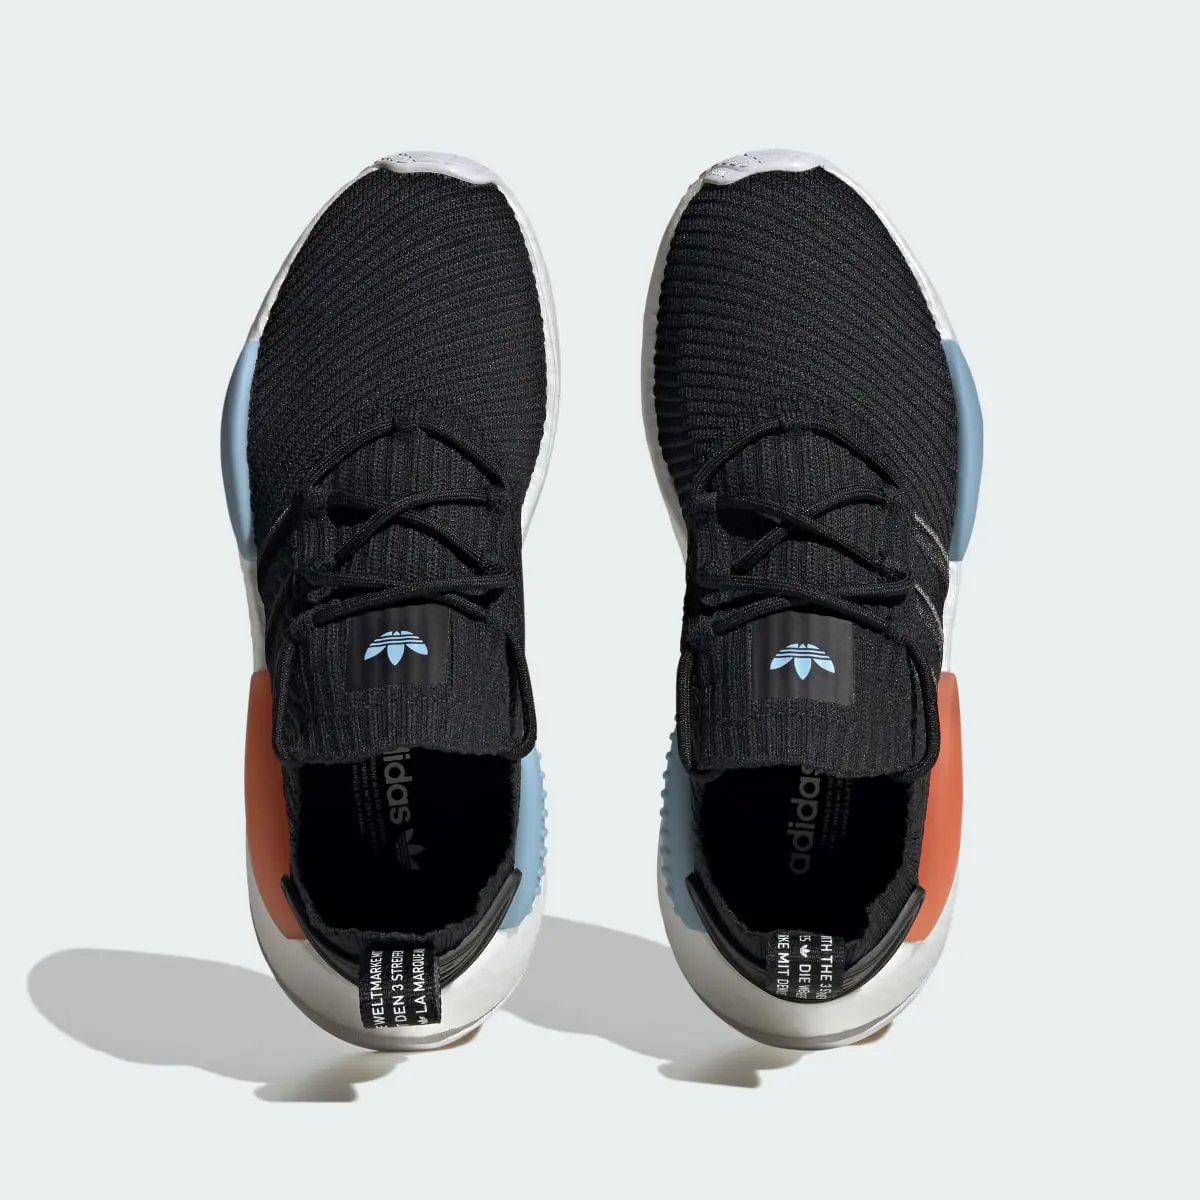 Adidas NMD_W1 Shoes. 3